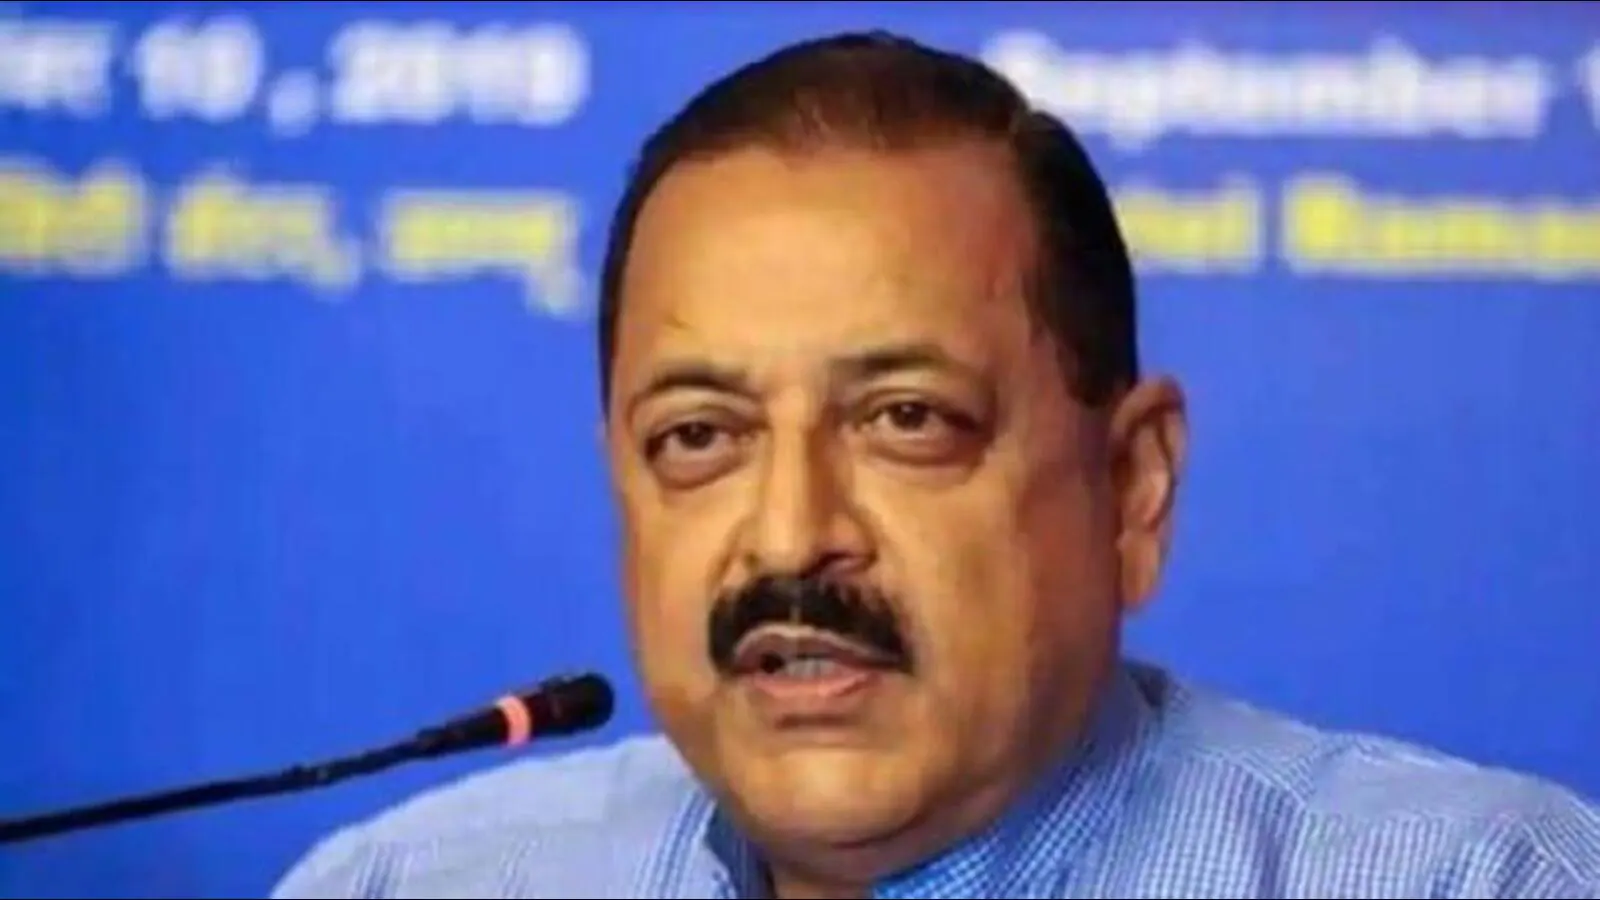 Healthcare sector in India to become $50 billion industry by 2025: Jitendra Singh